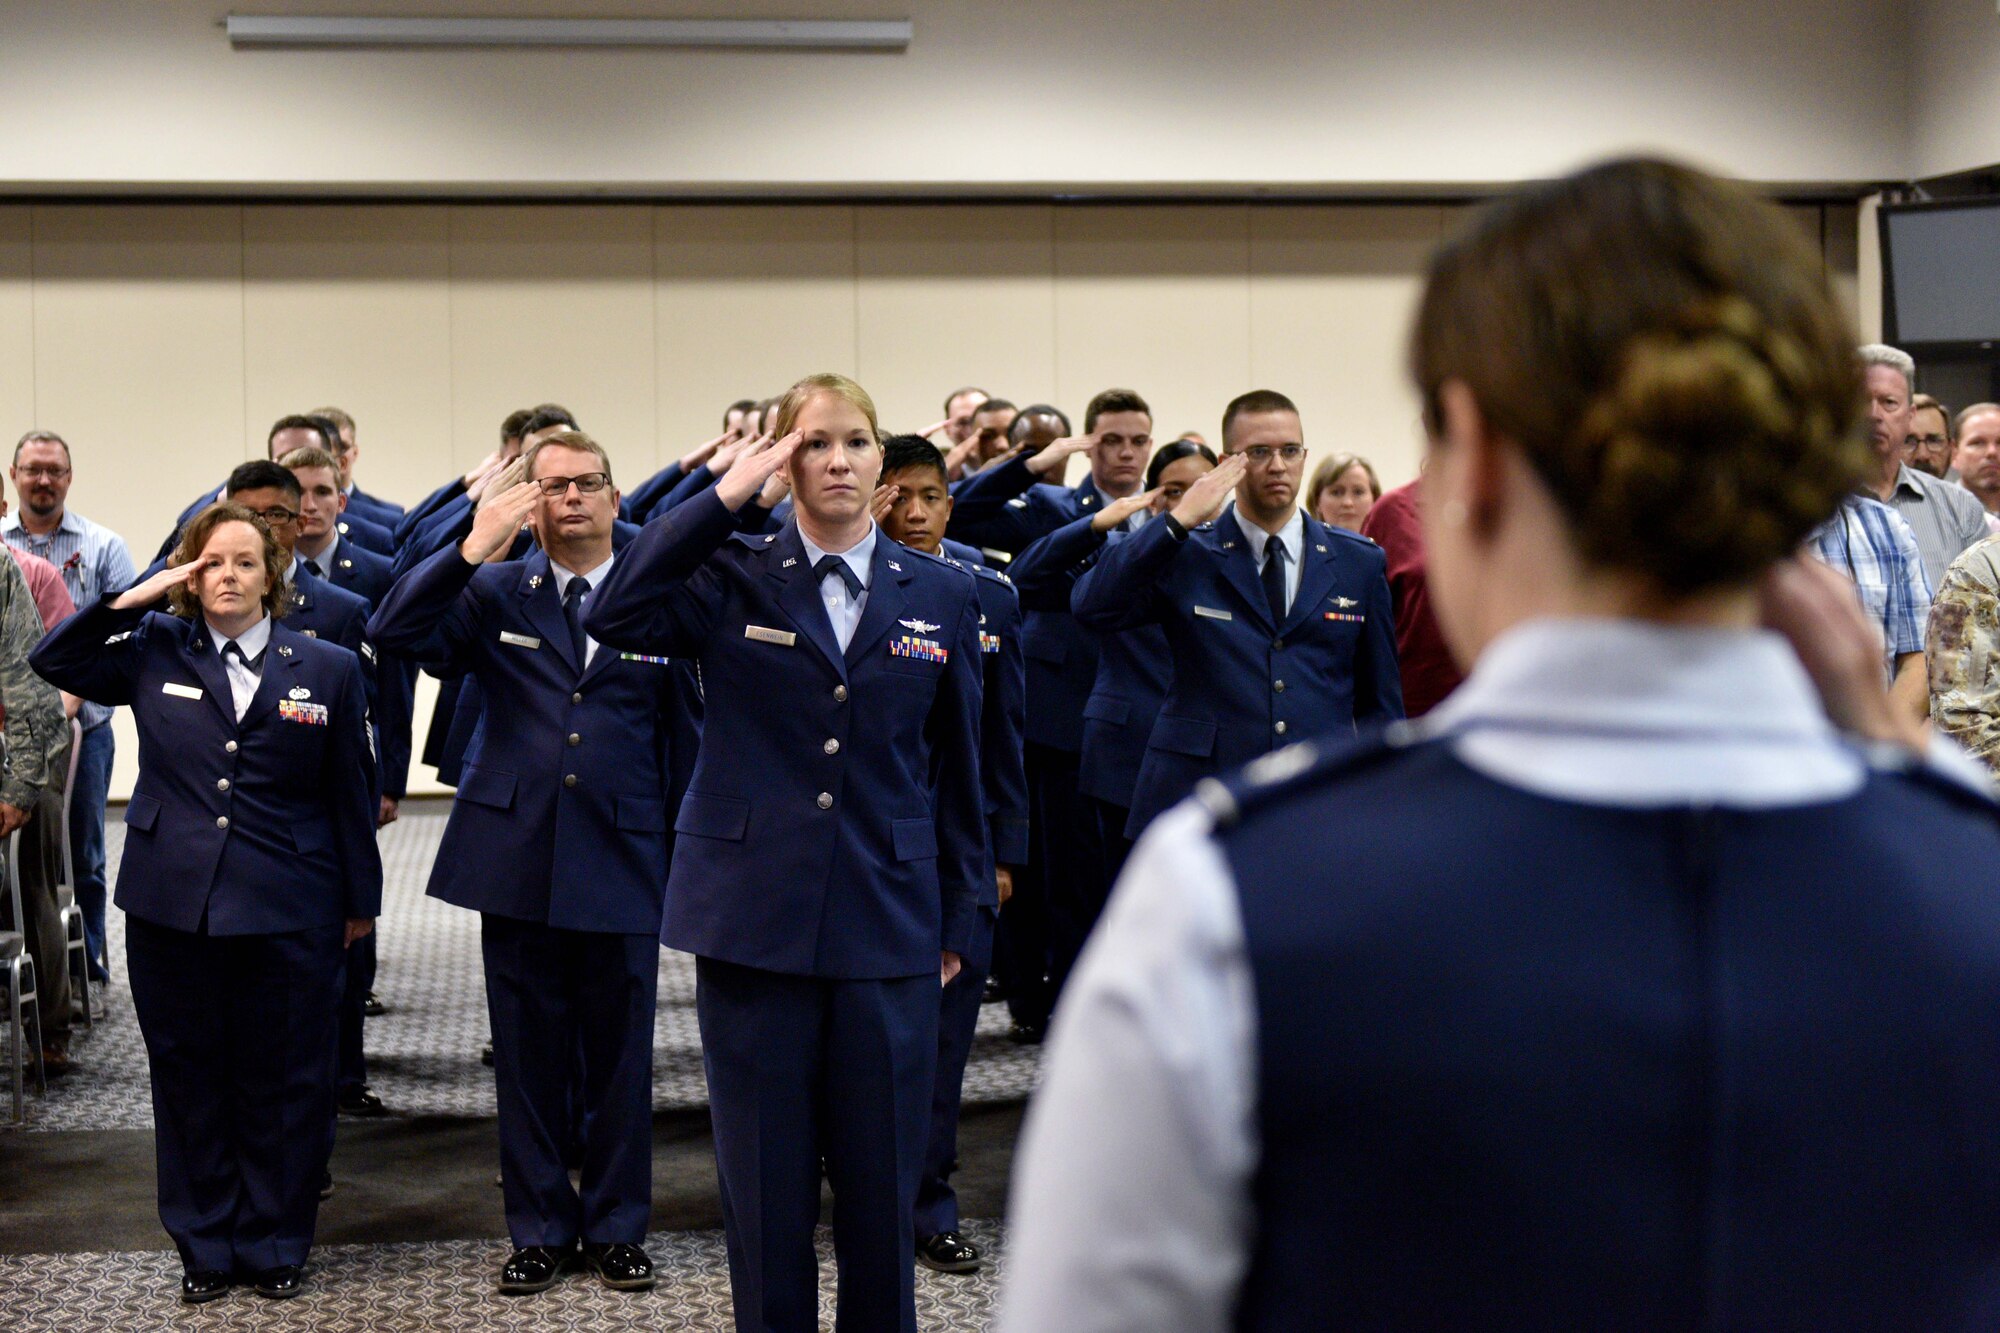 Members of the 17th Training Support Squadron salute U.S. Air Force Lt. Col. Amber Saldaña, 17th TRSS commander, during the 17th TRSS Change of Command in the Event Center on Goodfellow Air Force Base, Texas, August 14, 2018. The change of command ceremony is a time honored military tradition that signifies the orderly transfer of authority. (U.S. Air Force photo by Senior Airman Randall Moose/Released)